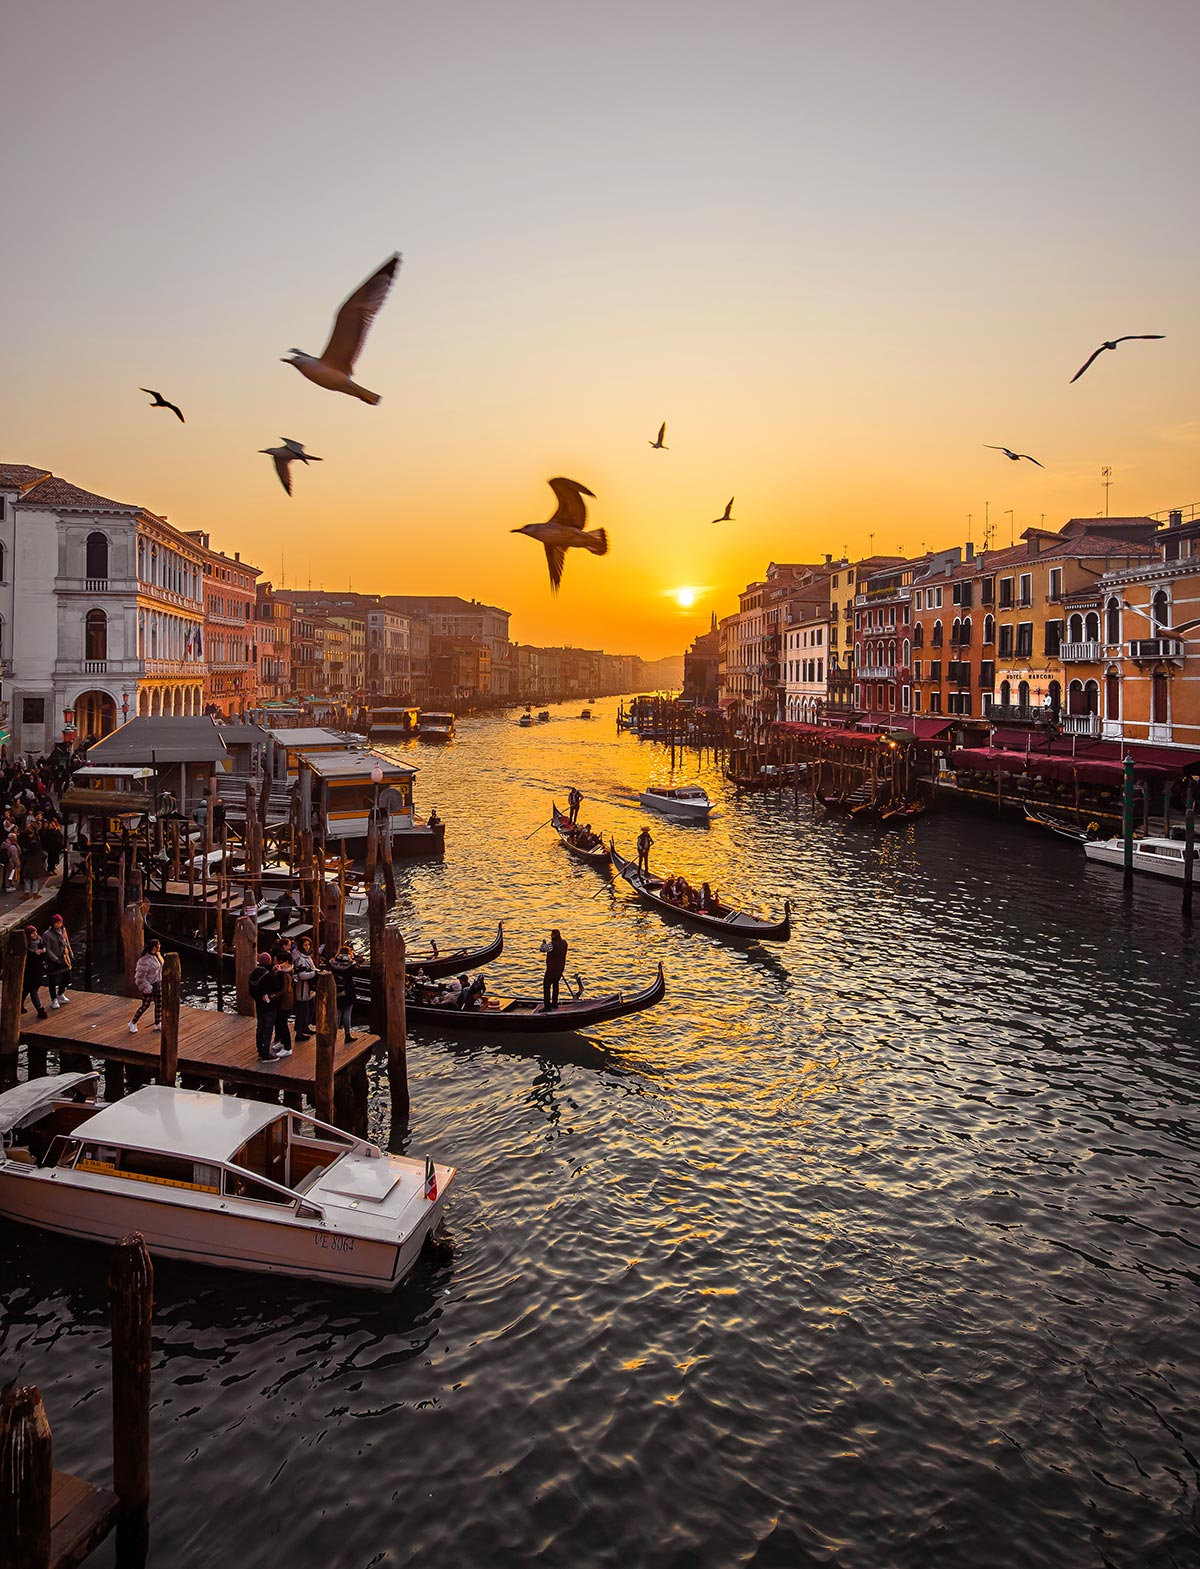 Venice City Guide: The best 11 things to do in Venice